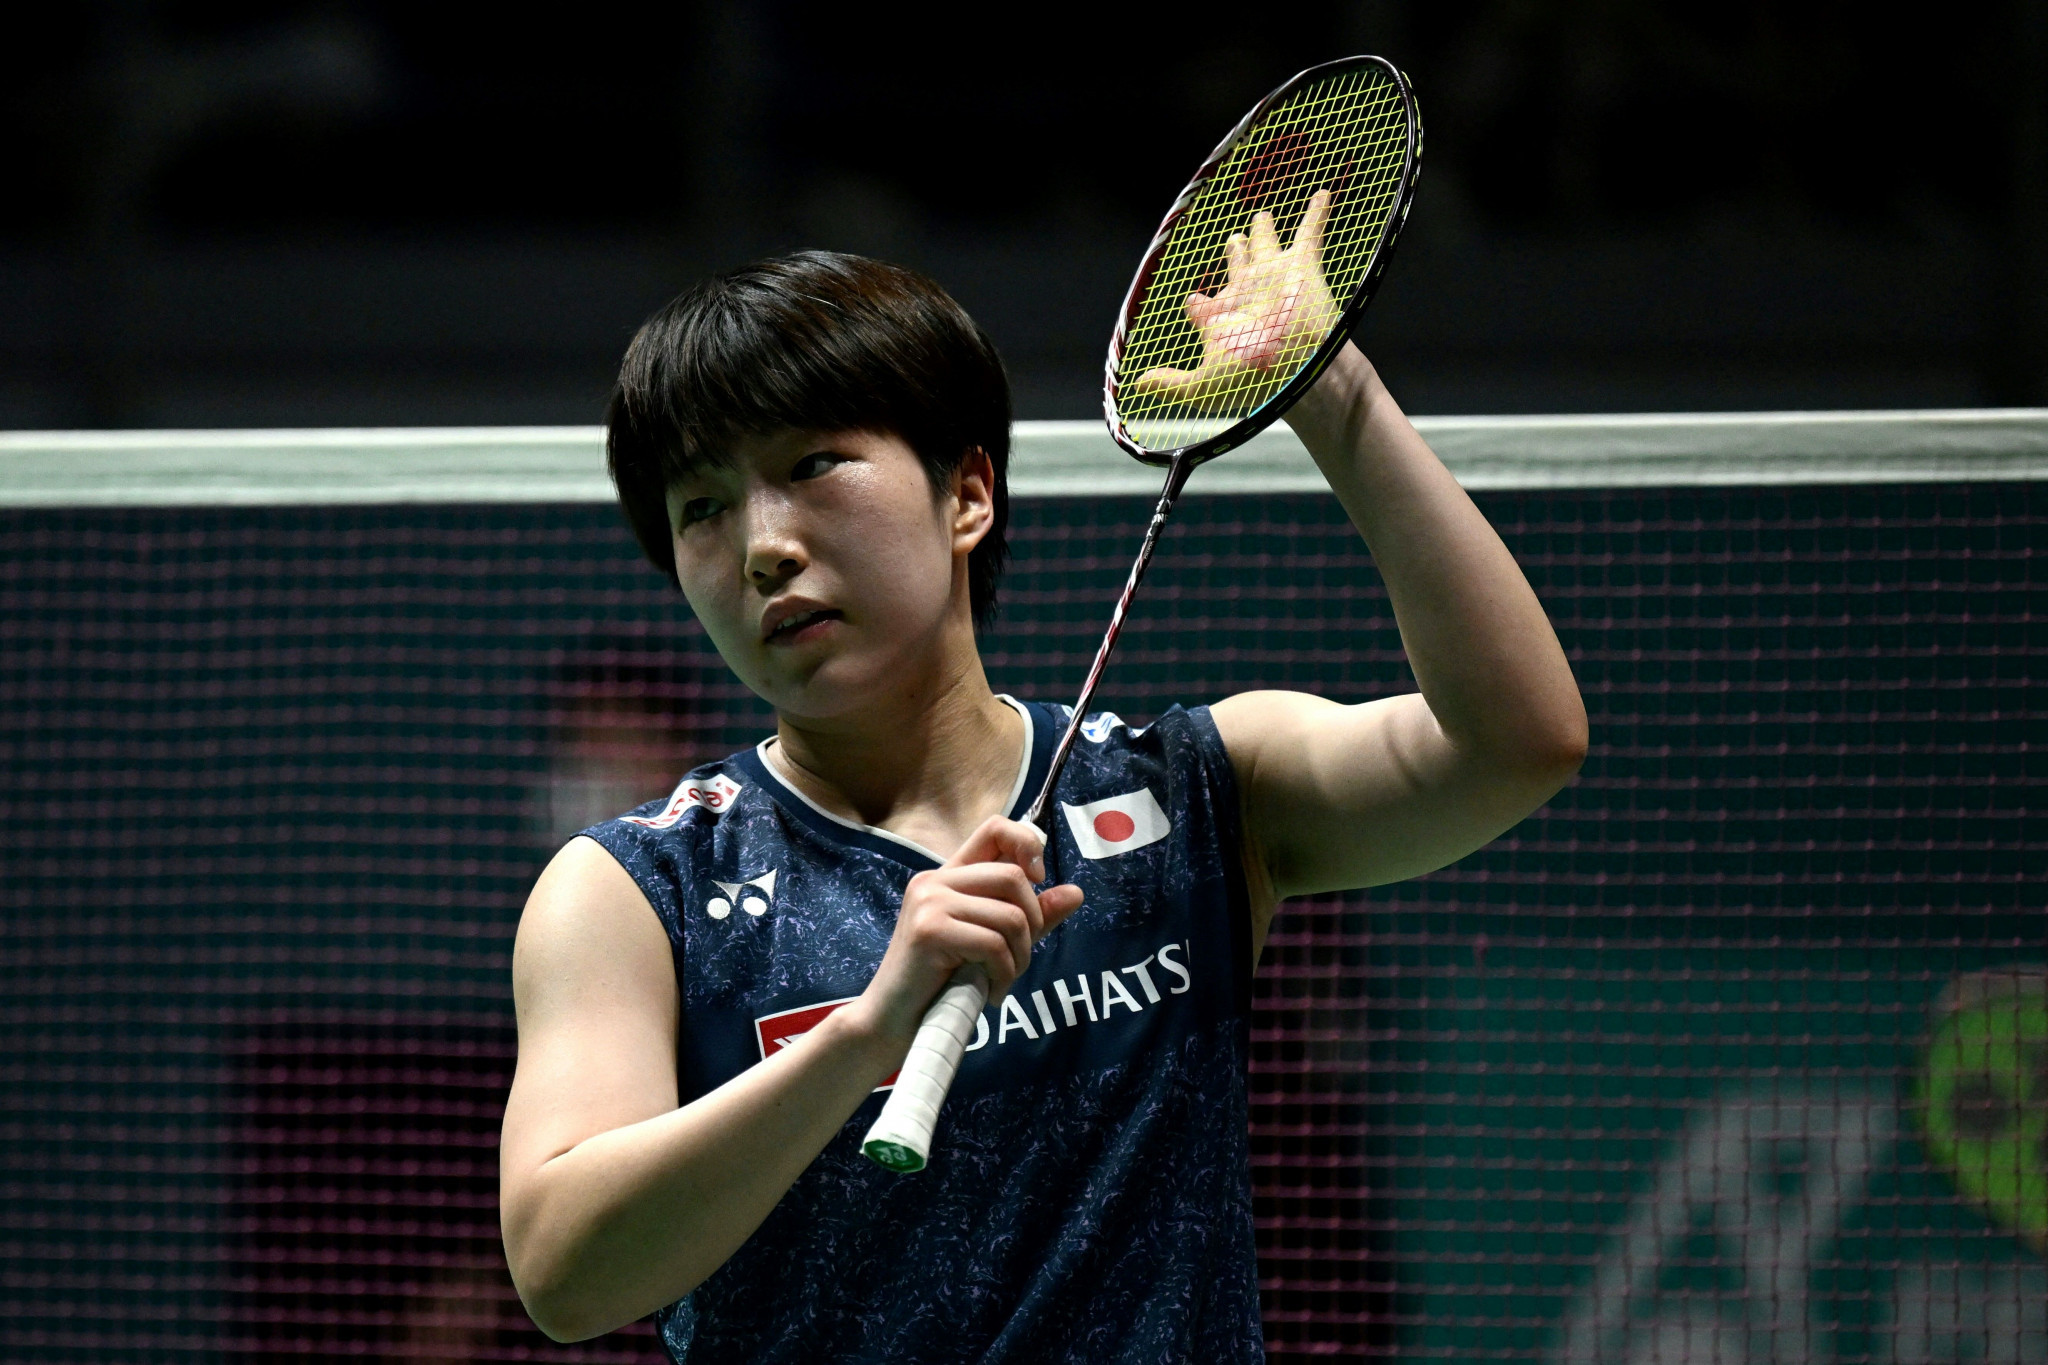 Women's singles top seed Akane Yamaguchi of Japan triumphed at the Malaysia Open, the last BWF World Tour Super 1000 event ©Getty Images